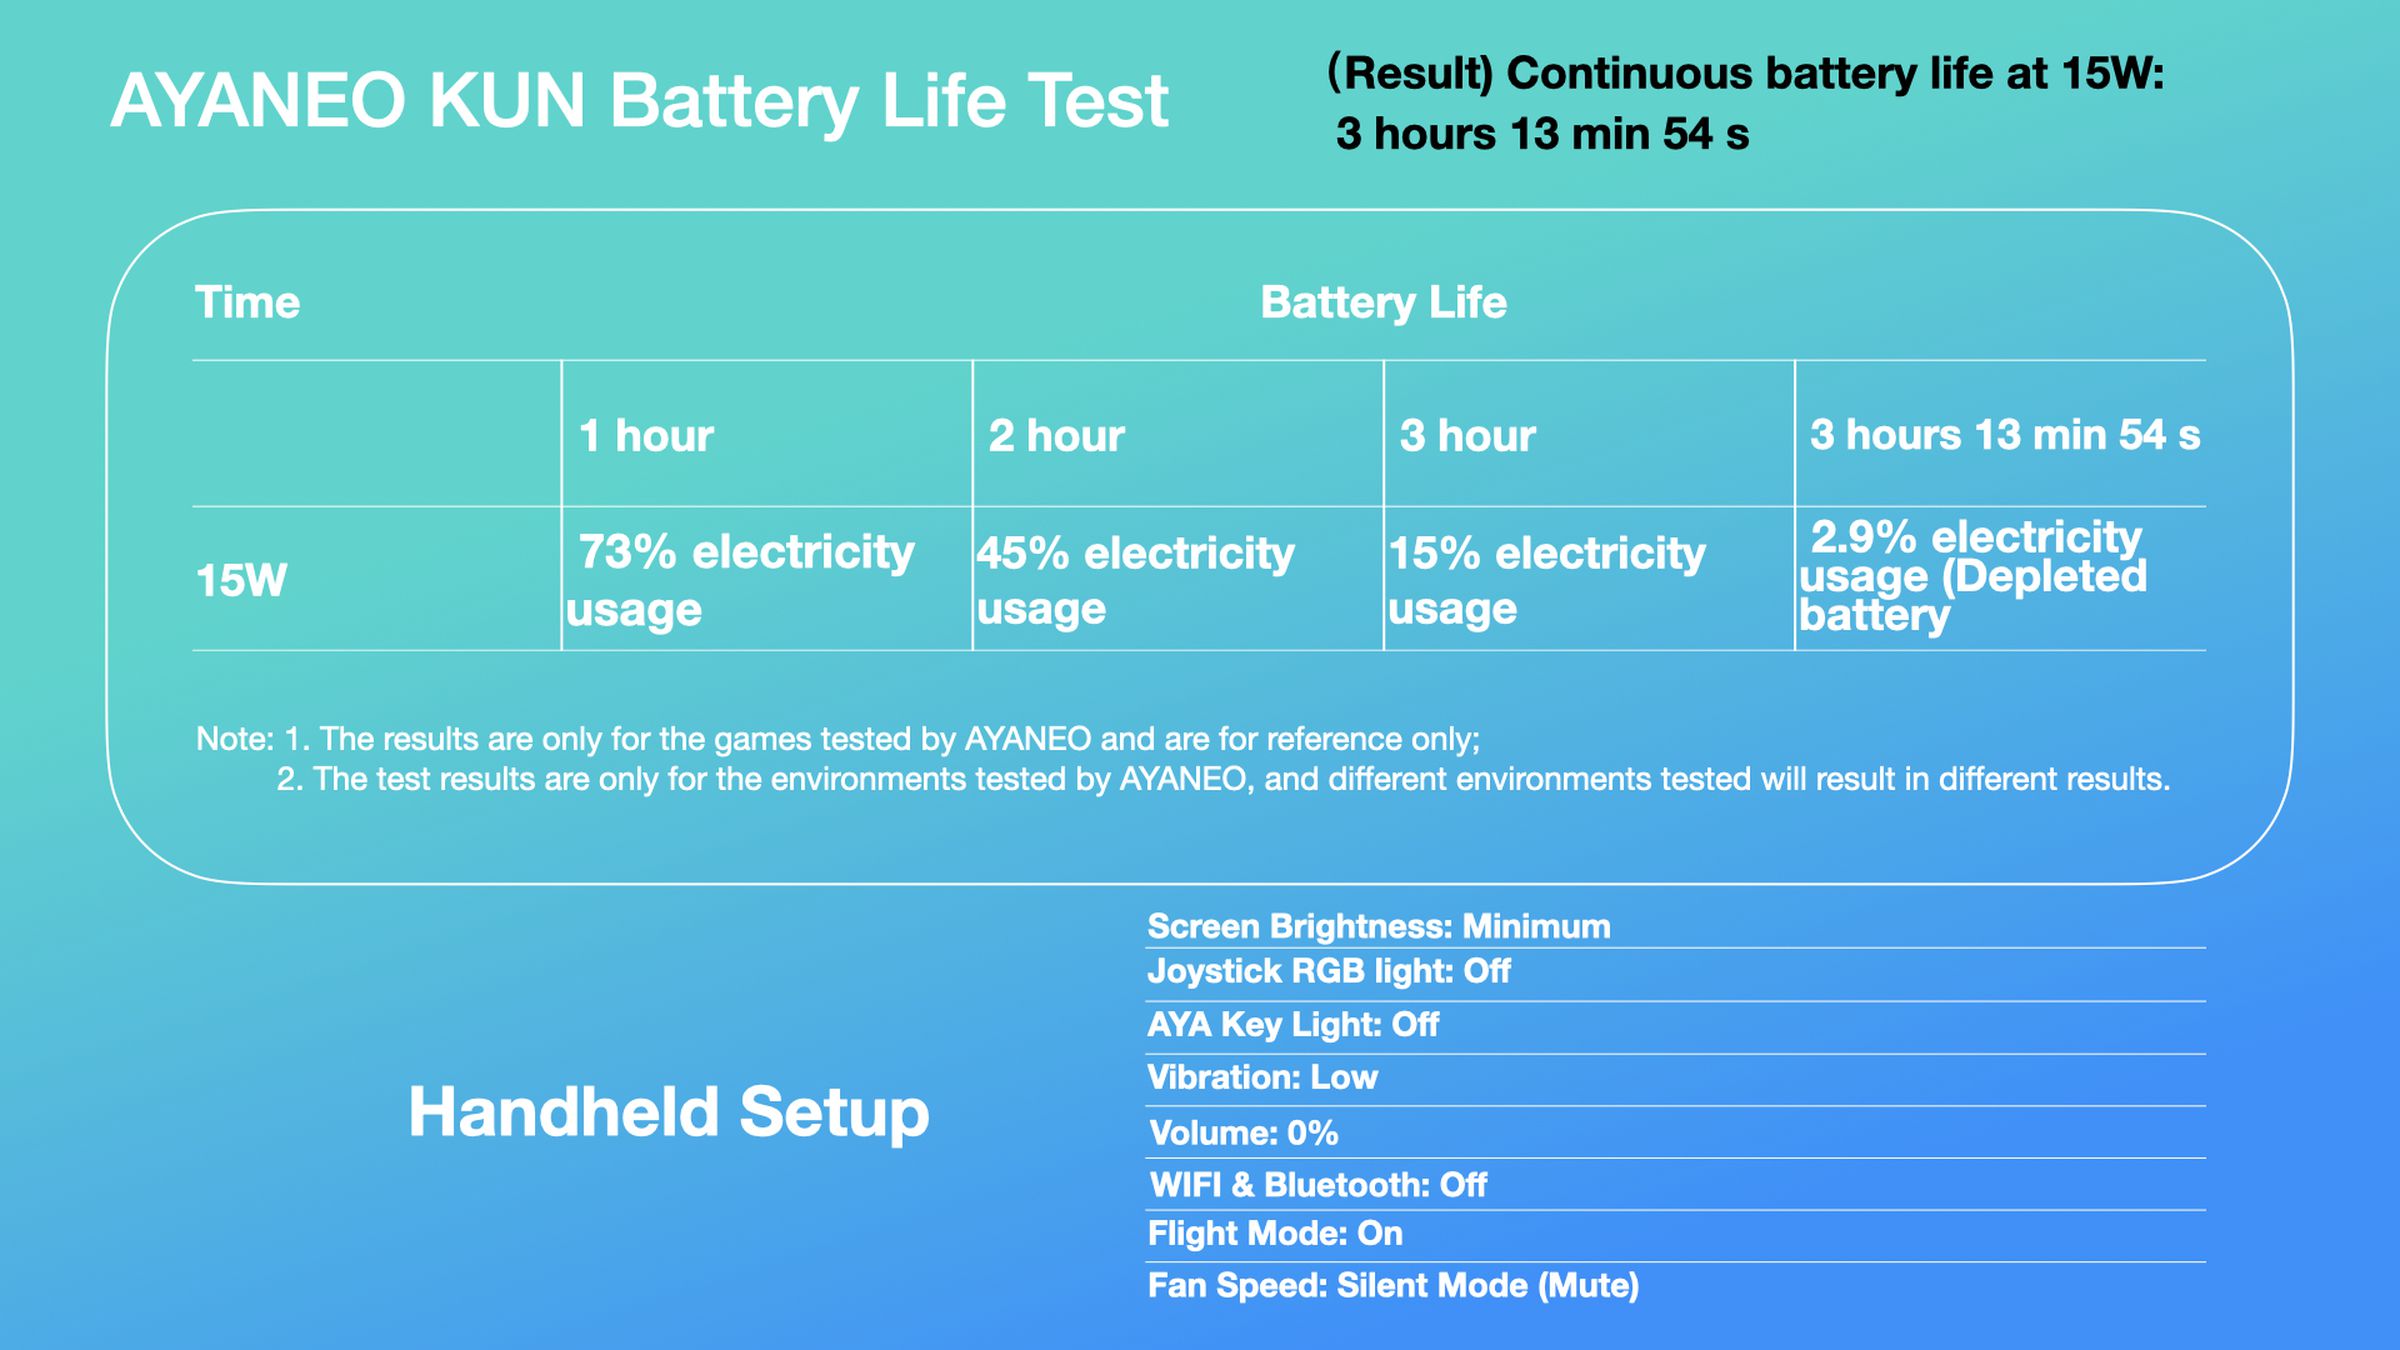 Ayaneo Kun battery life, according to its manufacturer.